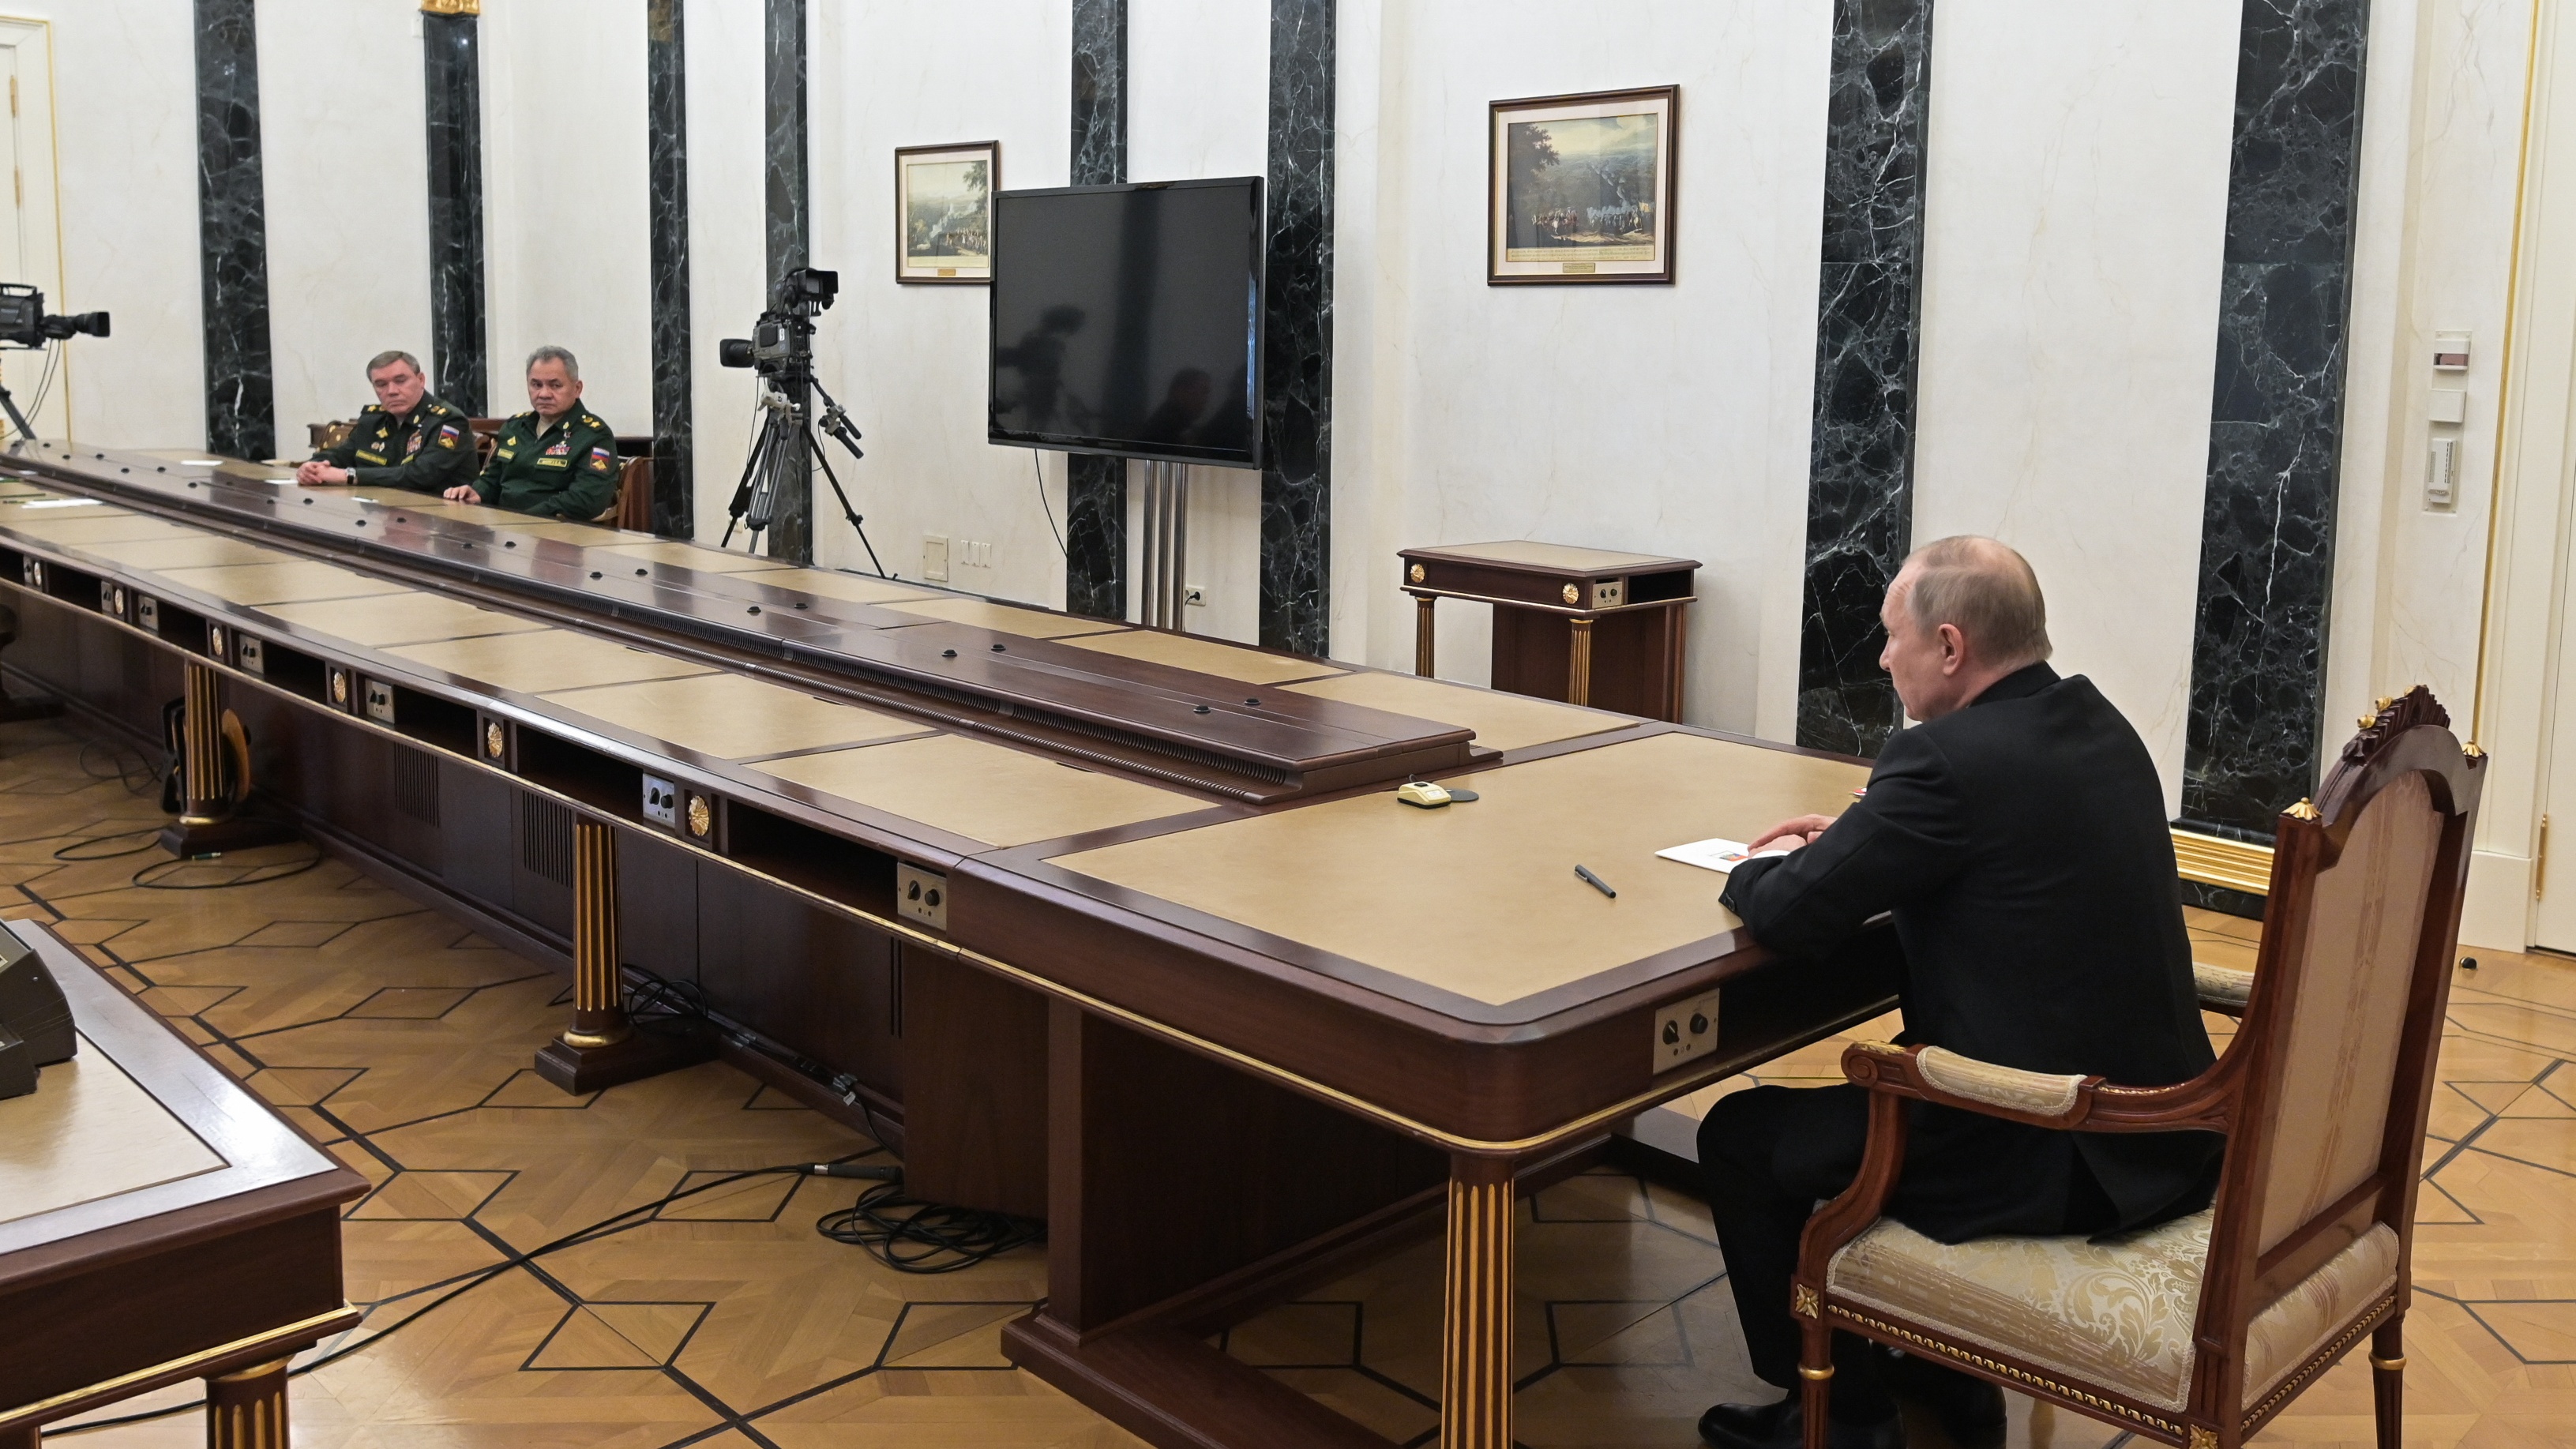 27 February: Vladimir Putin meets with his Defence Minister Sergei Shoigu and Chief of the General Staff of the Russian Armed Forces Valery Gerasimov at the Kremlin